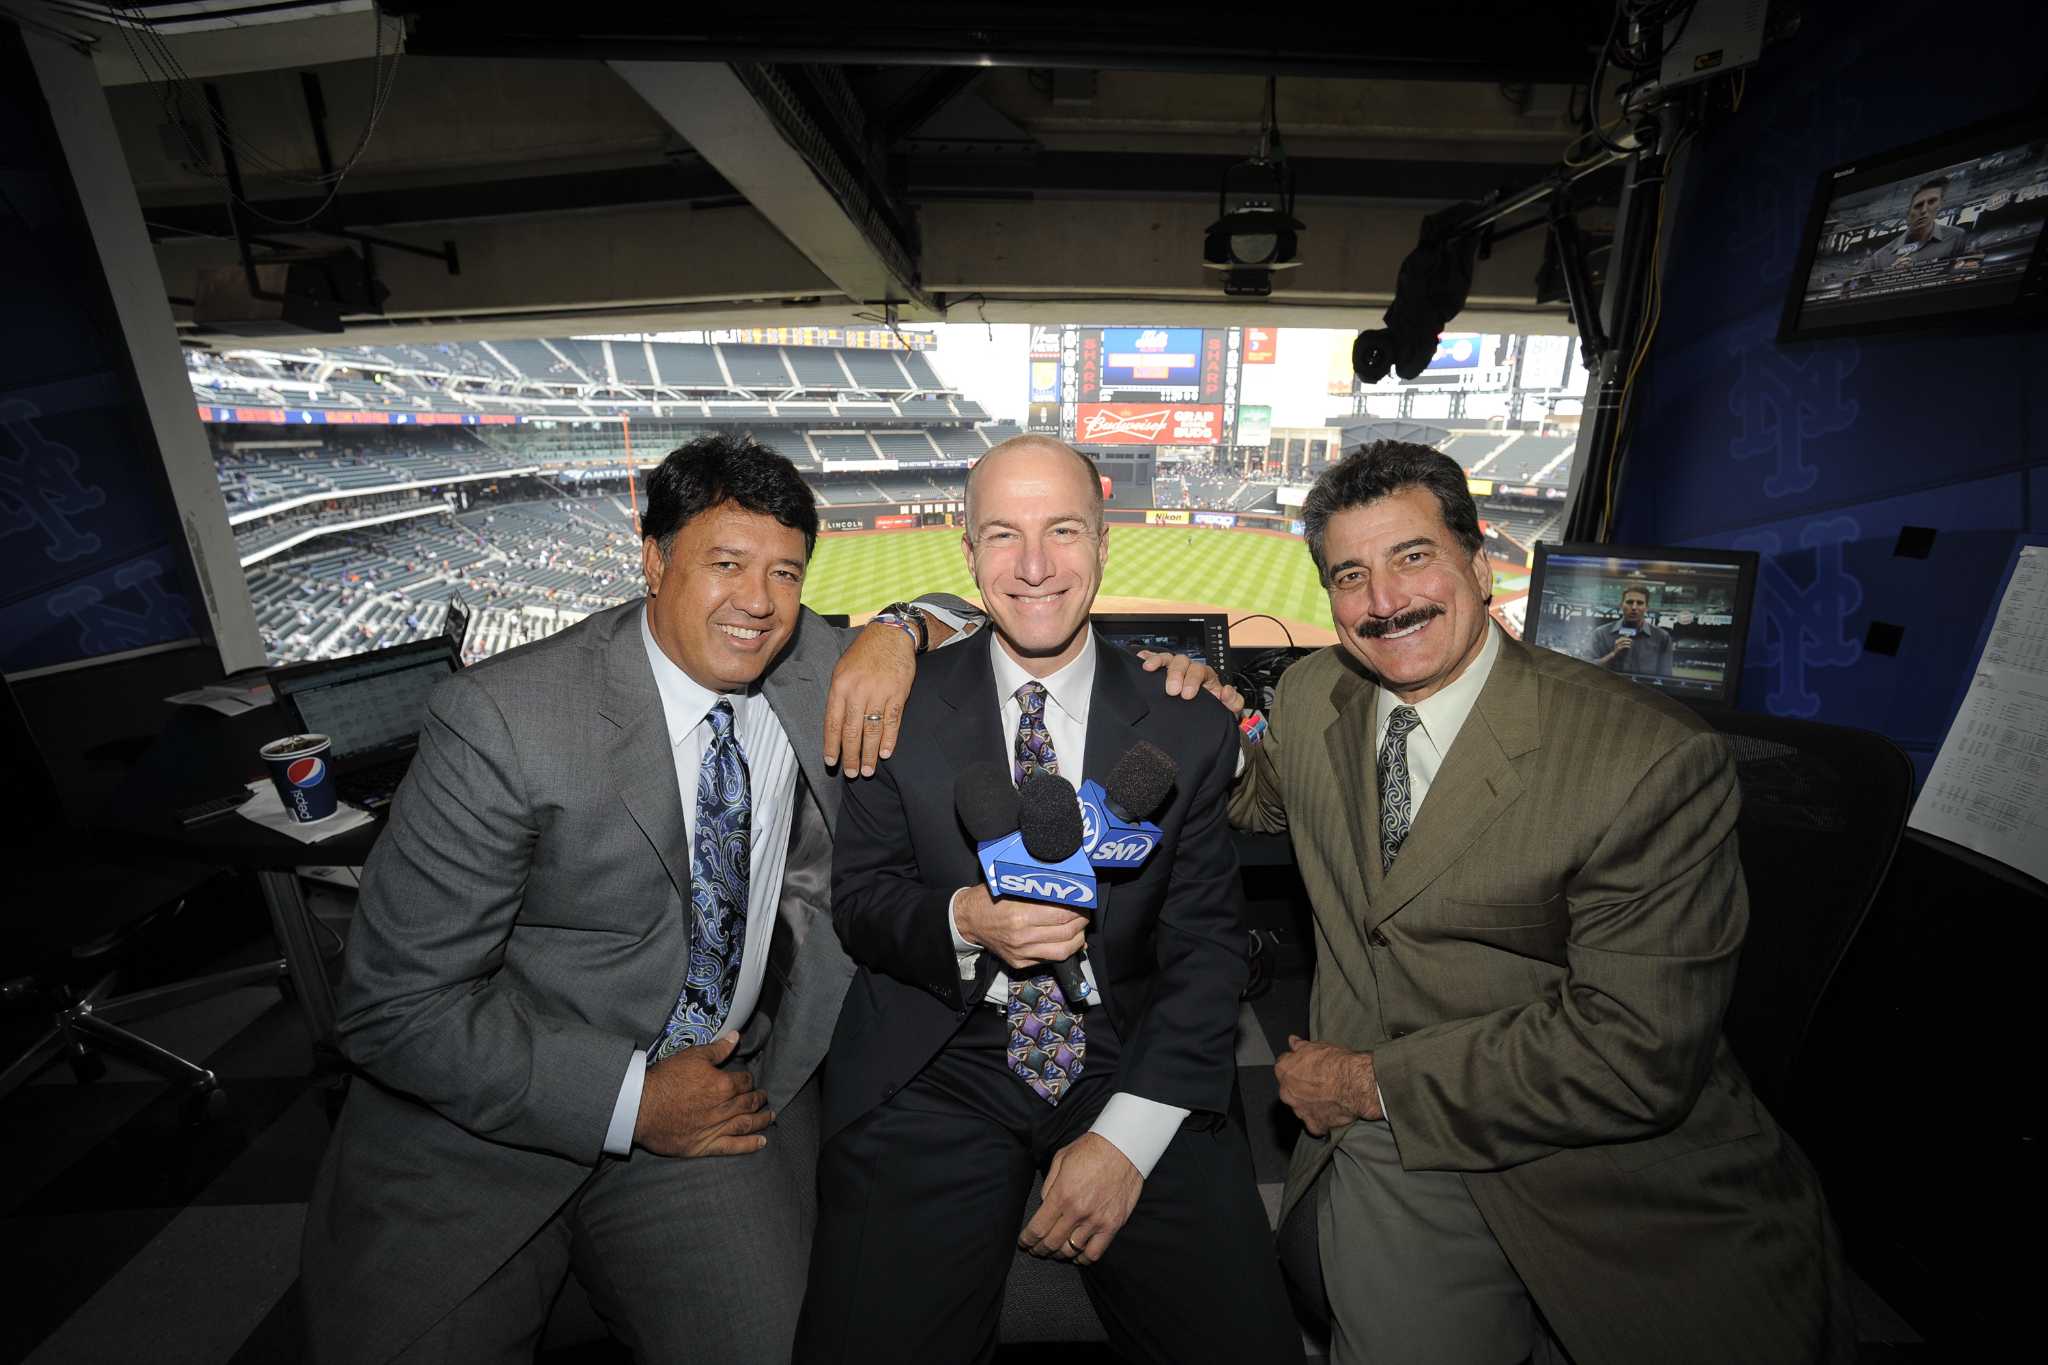 Sports media Ron Darling moves to national stage